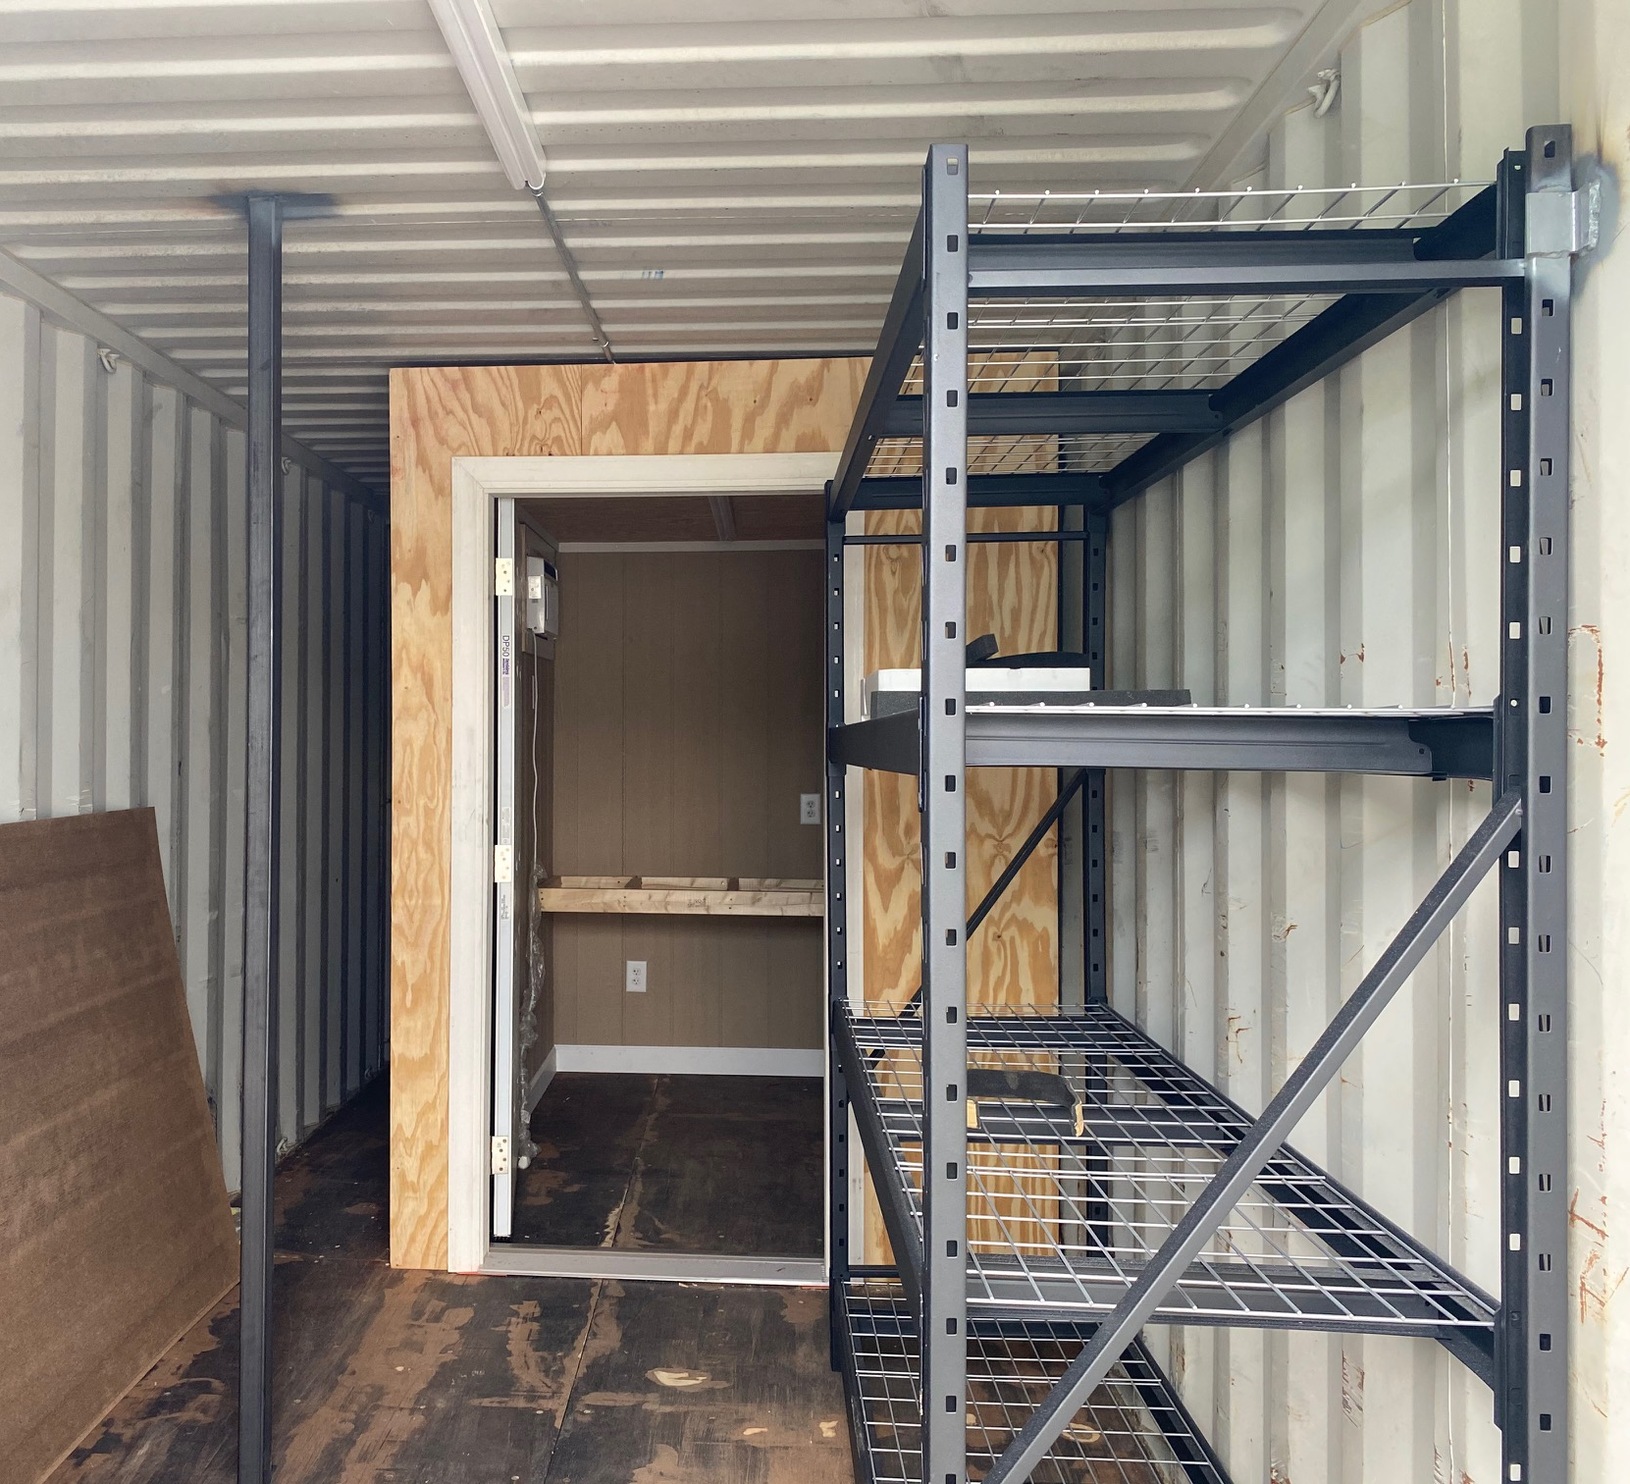 Container with shelving and interior design for storage